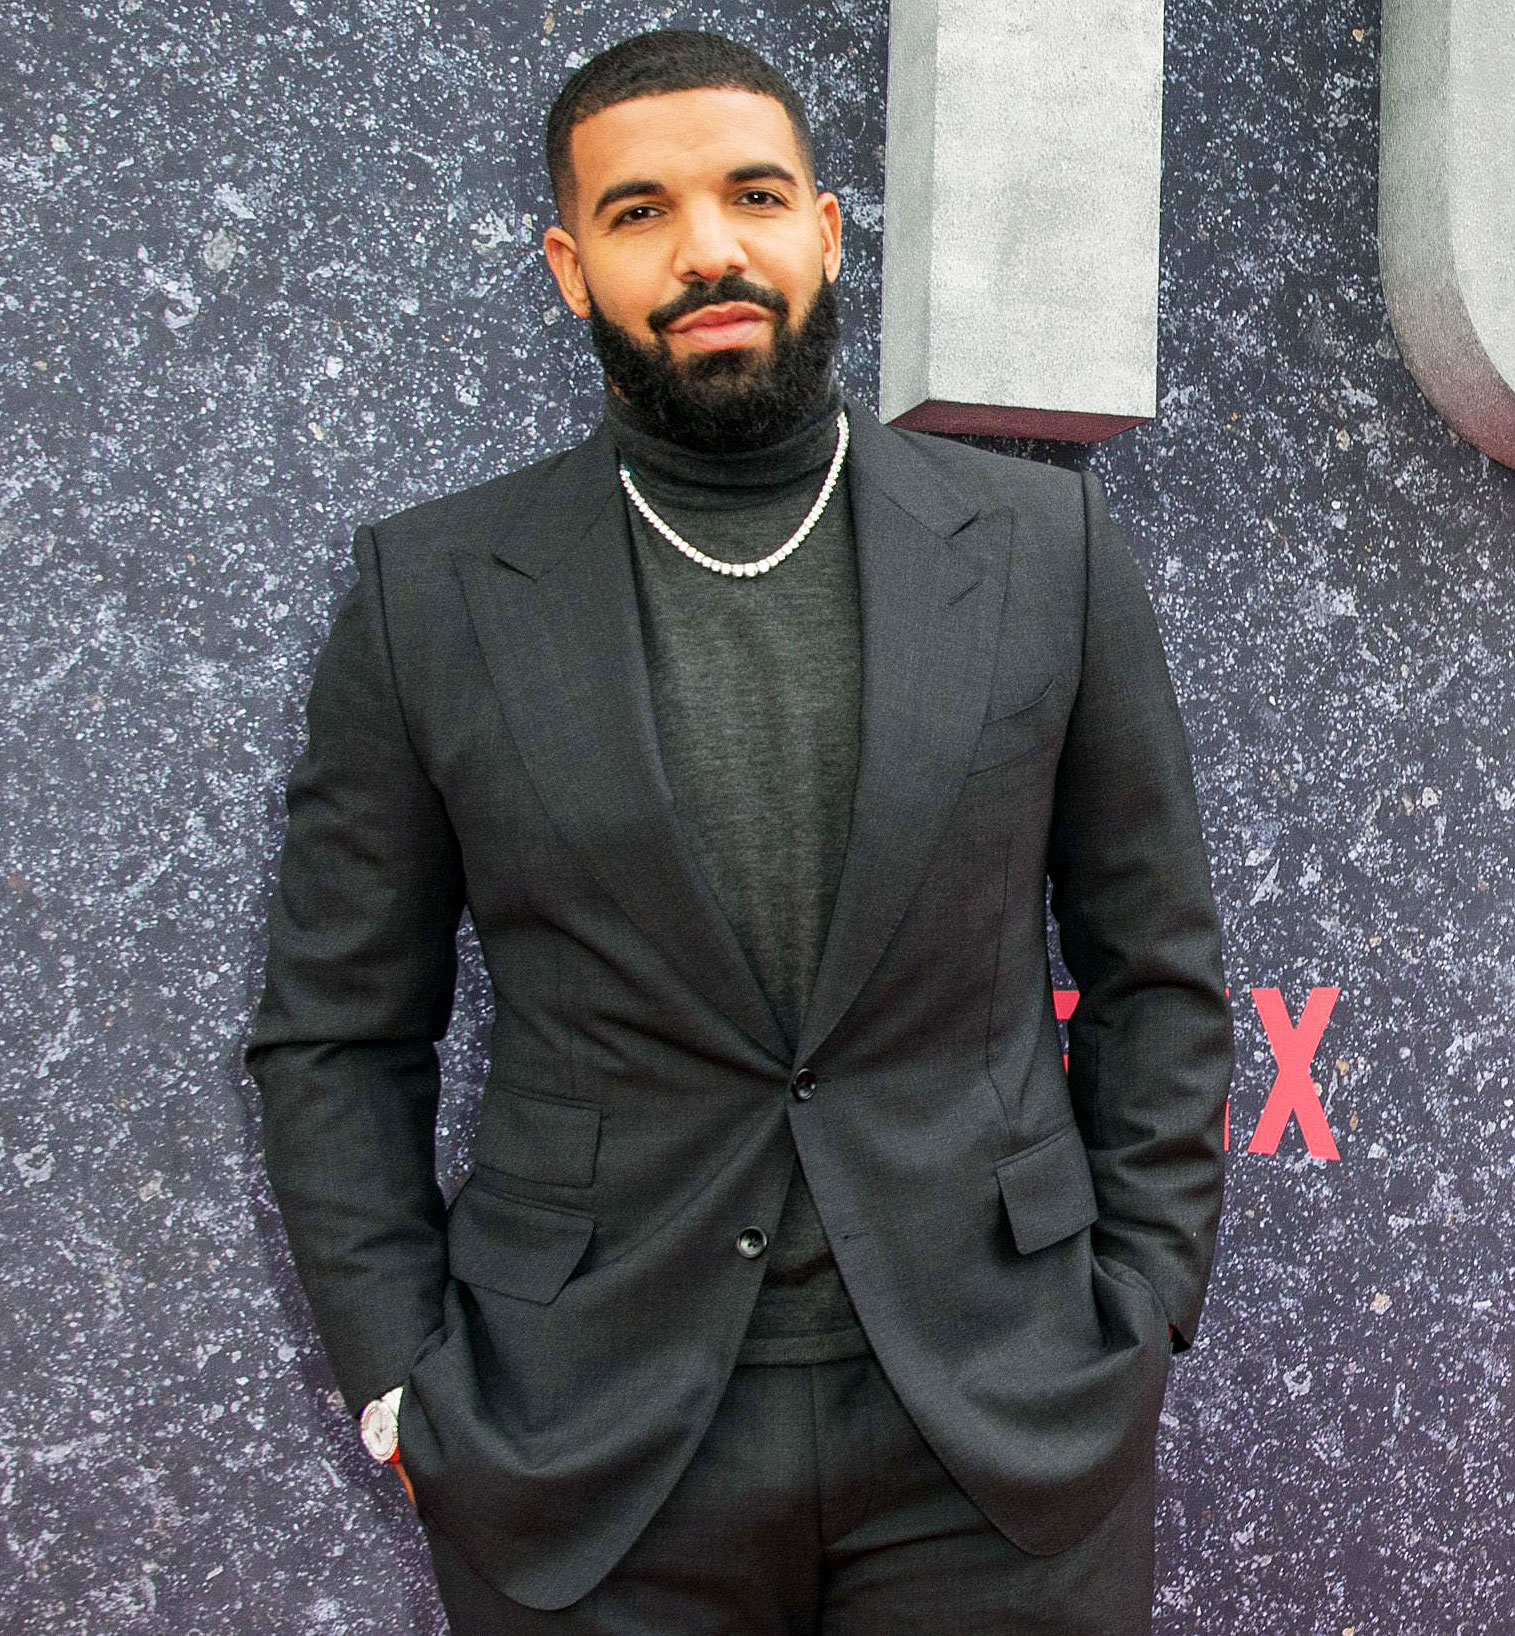 Drake Shares His 2-Year-Old Son Adonis’ Back-to-School Pic